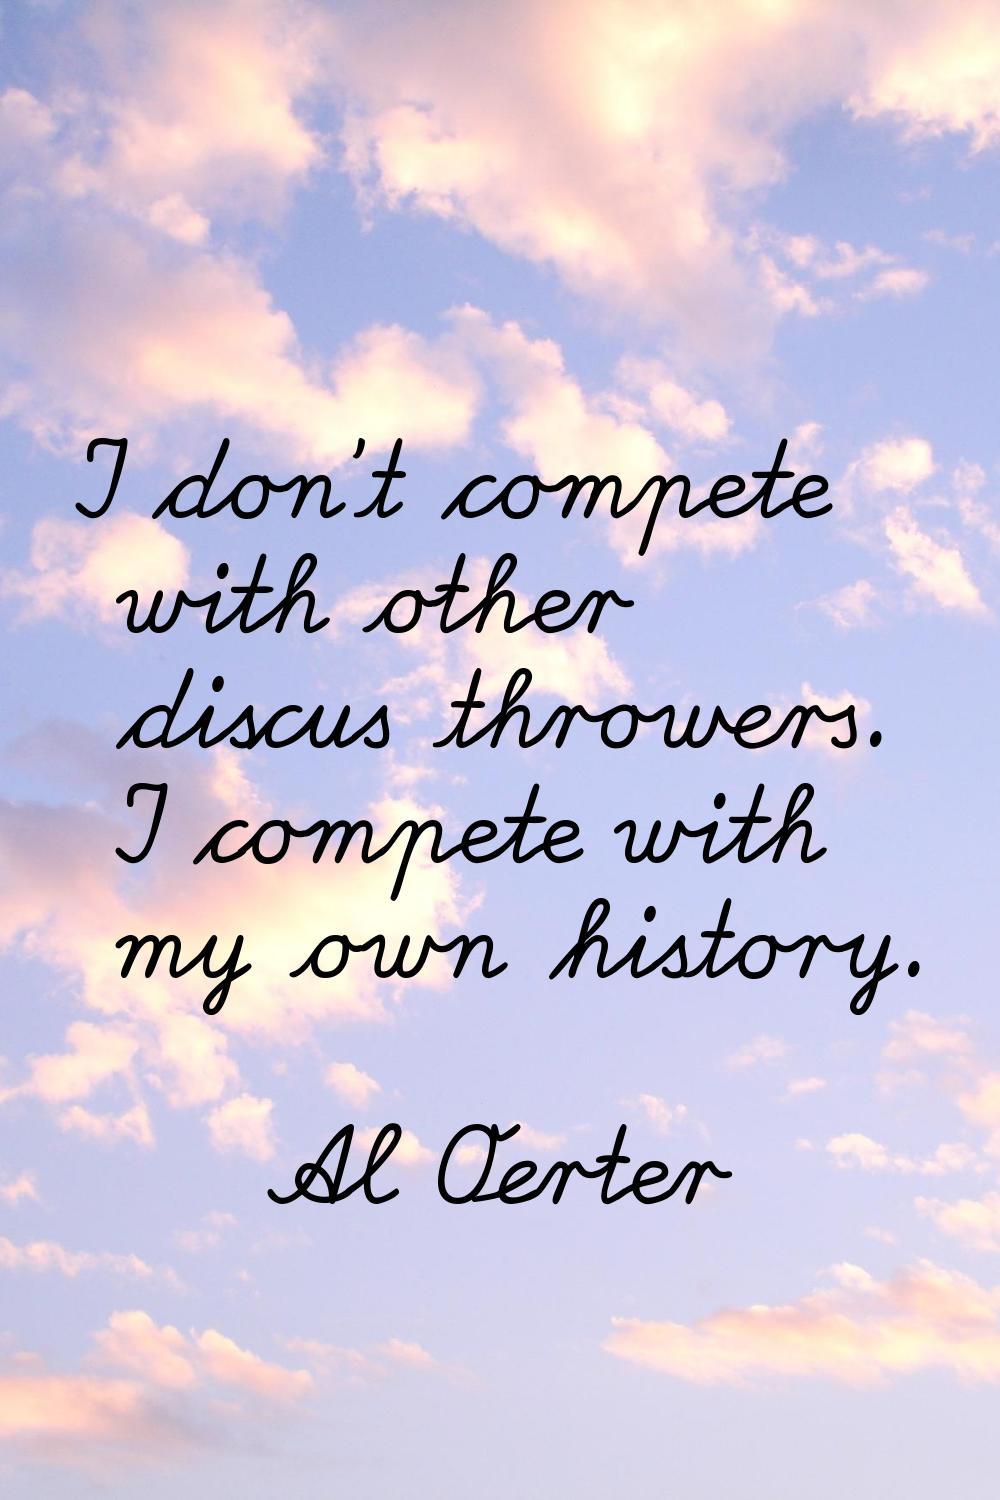 I don't compete with other discus throwers. I compete with my own history.